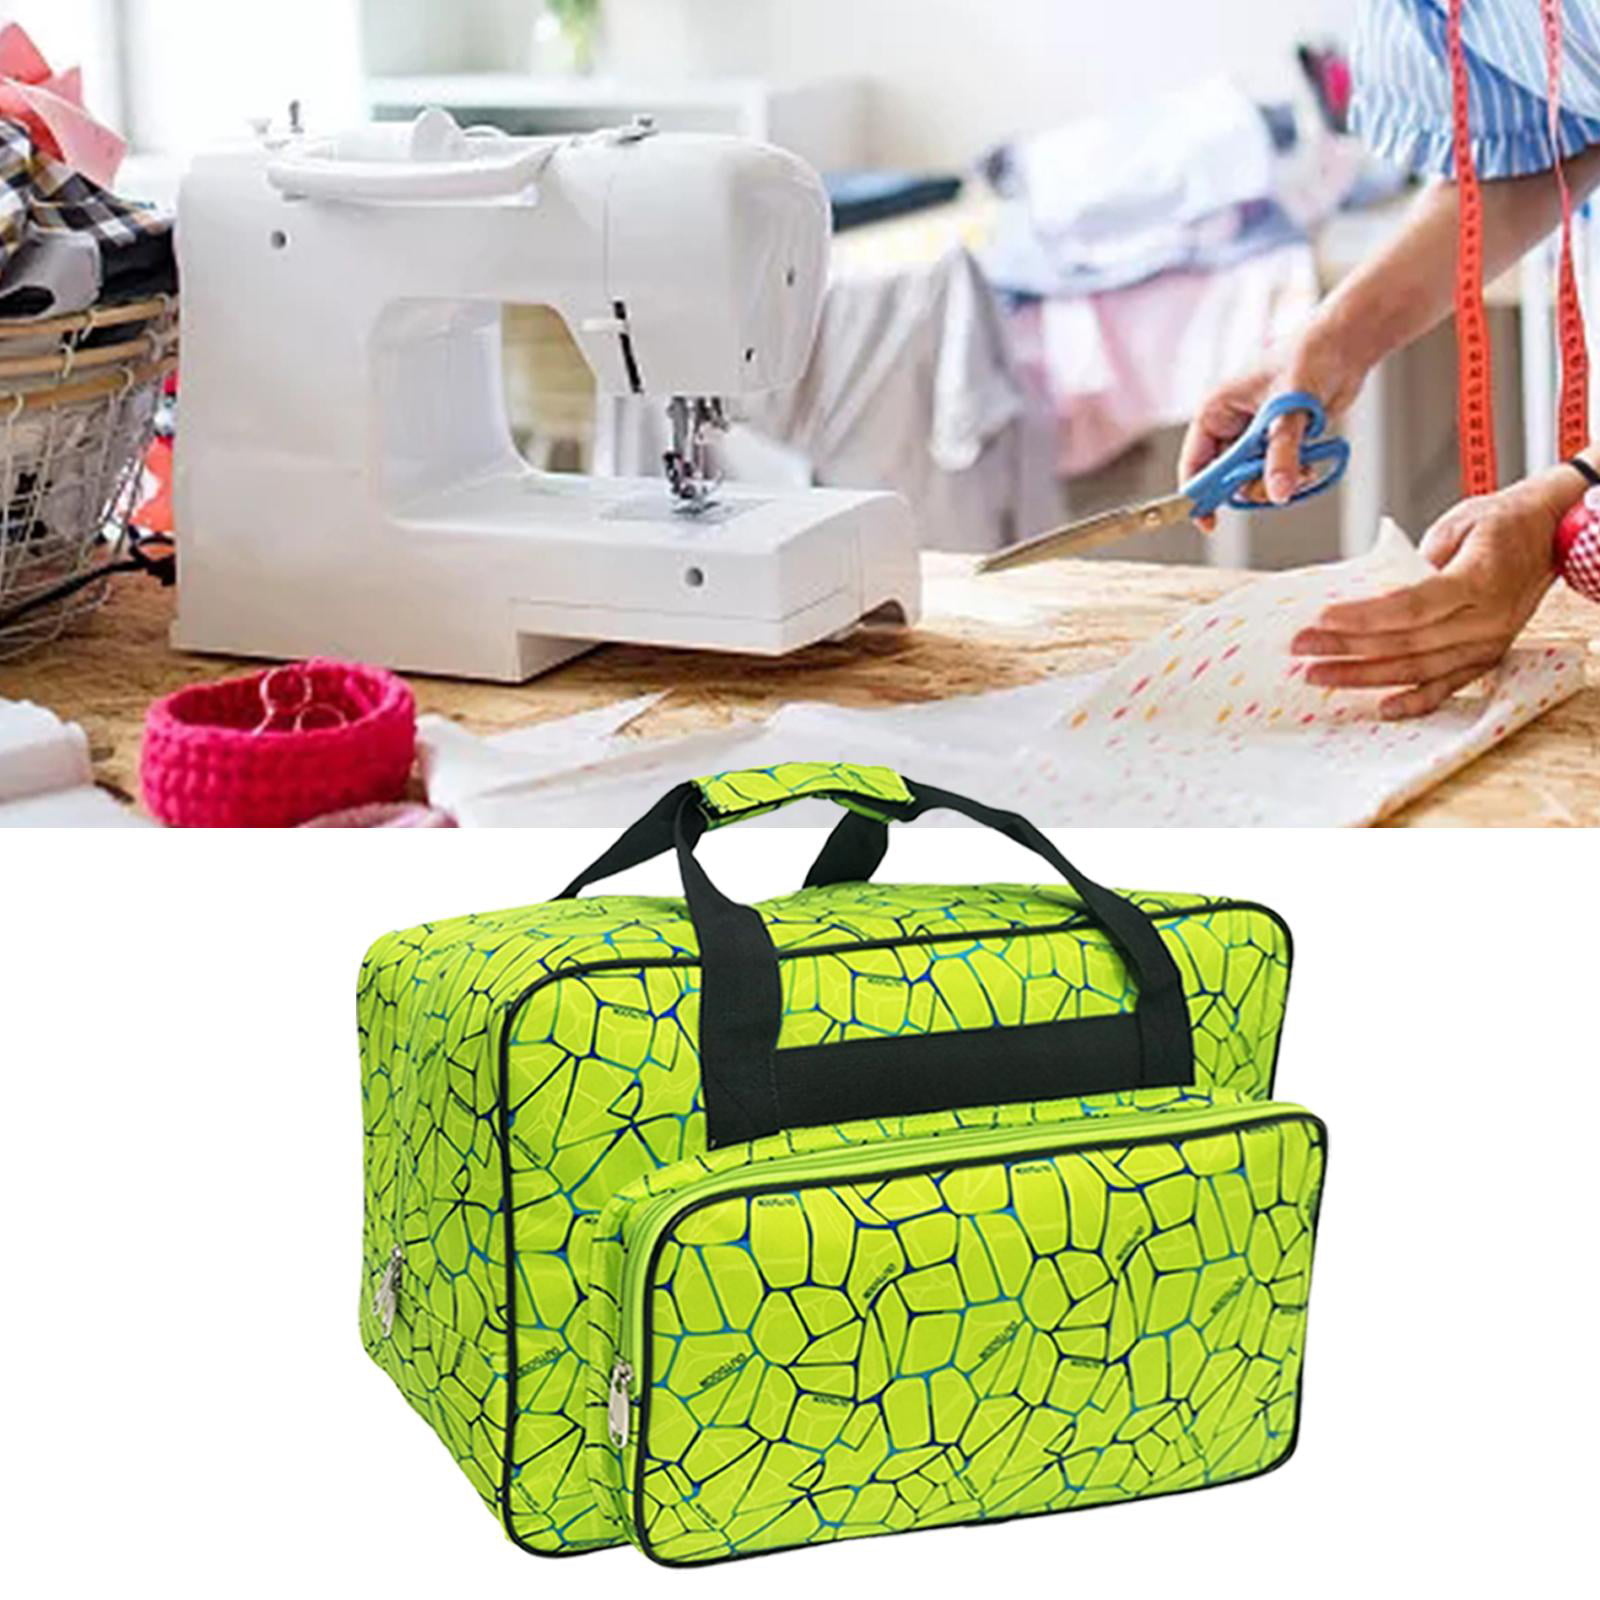 GCP Products Sewing Machine Bag, Portable Tote Bag Compatible With